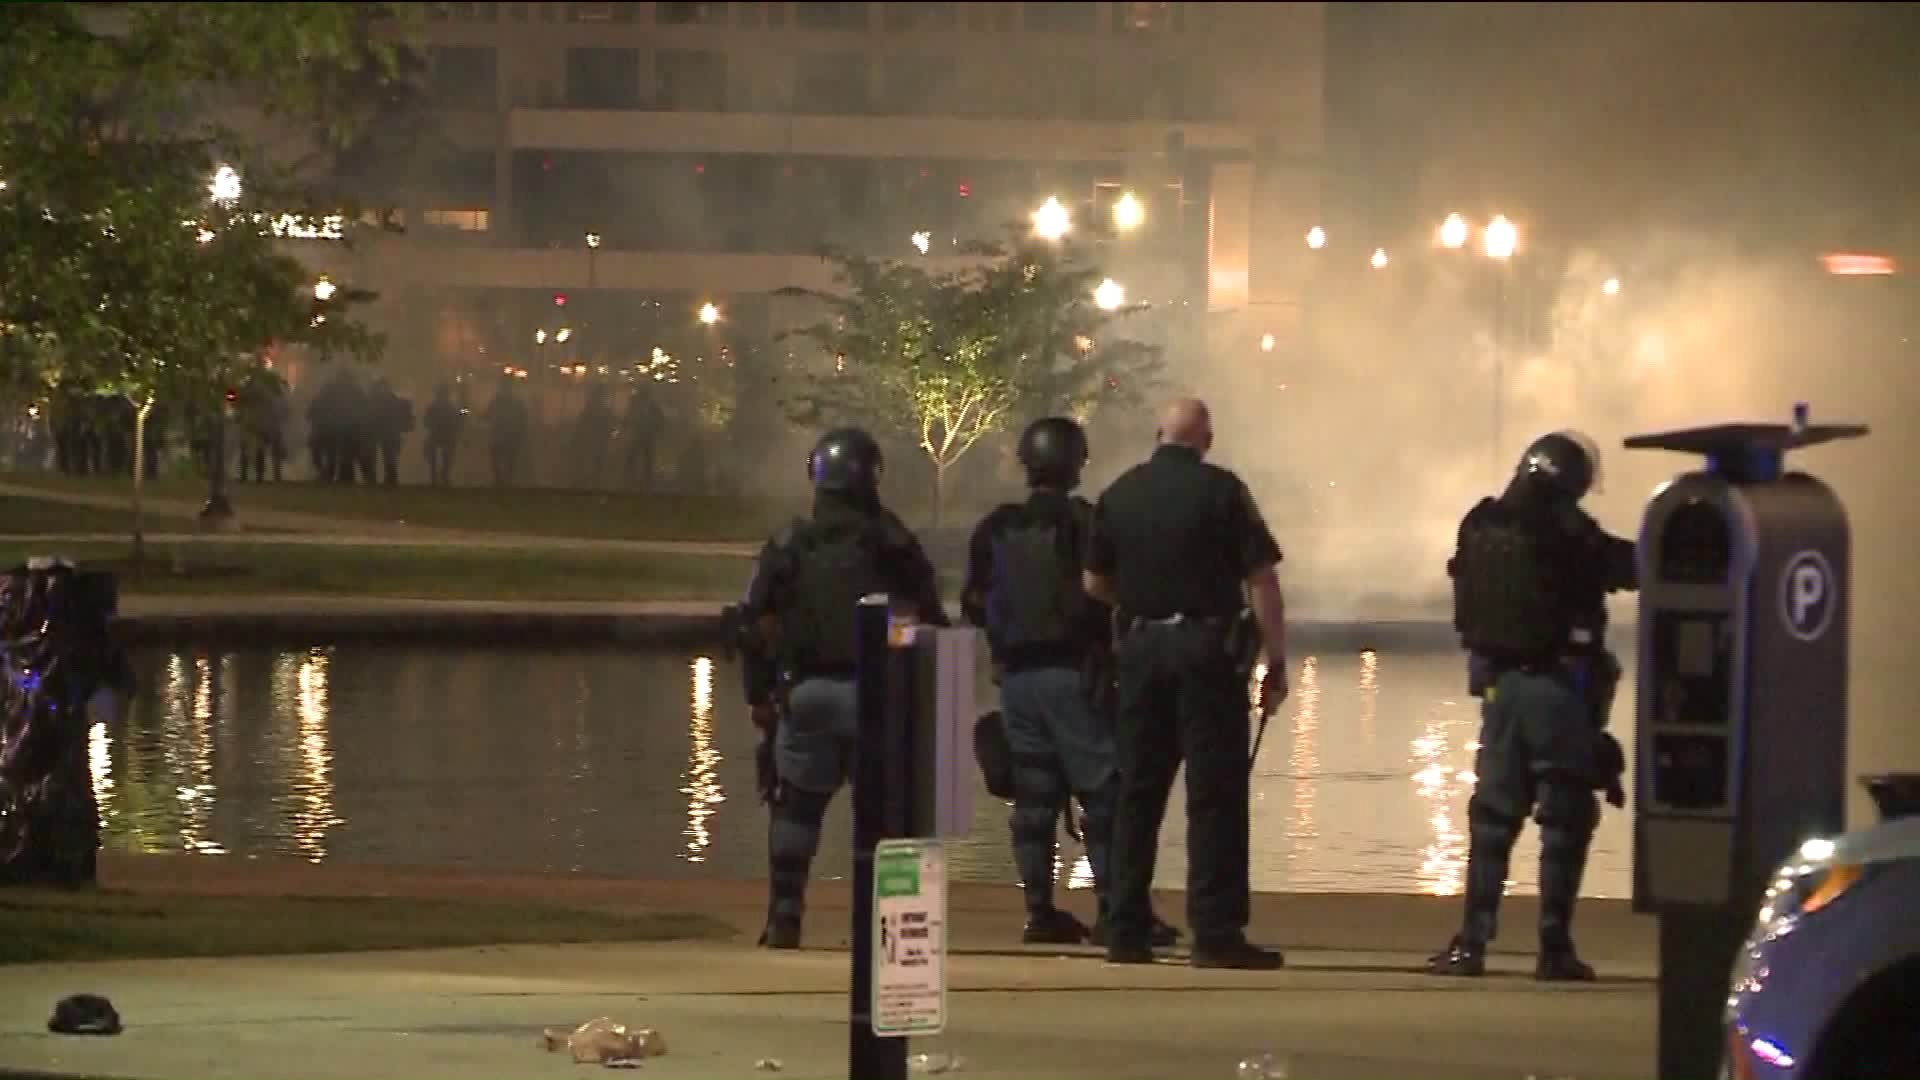 Police chief: Out-of-town anarchists stirred up trouble during Huntsville protests